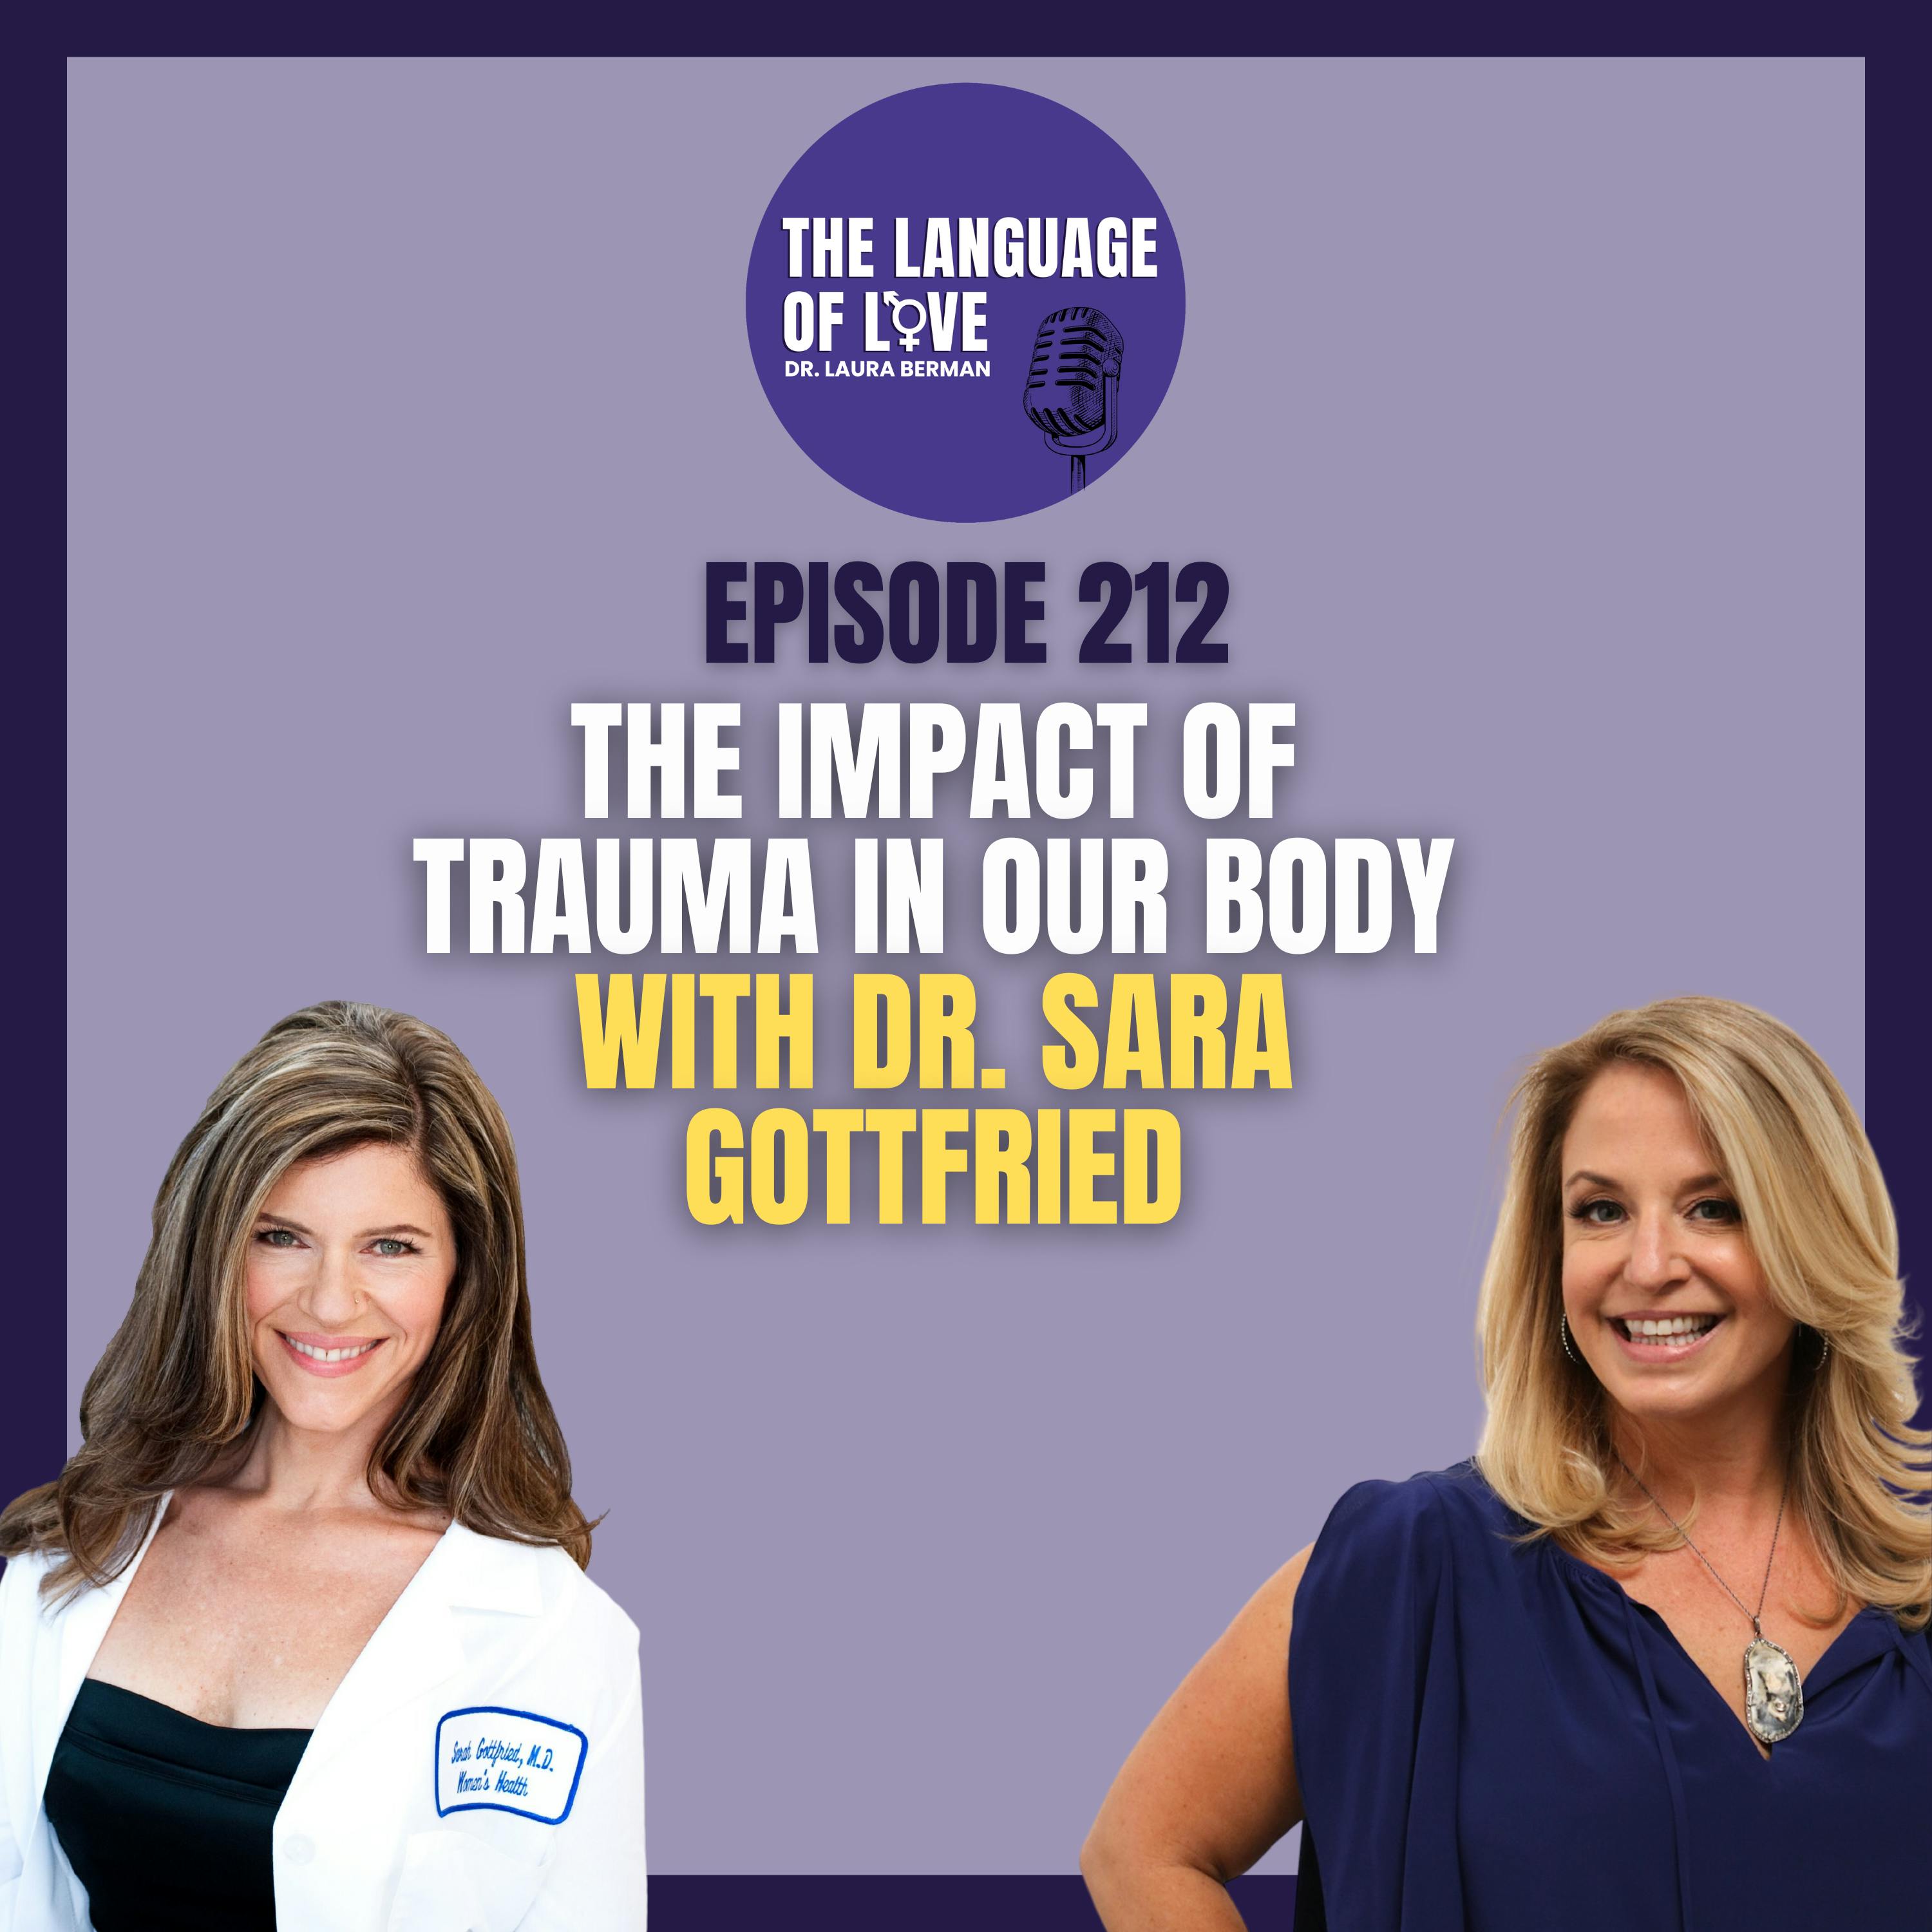 The Impact of Trauma in our Body with Dr. Sara Gottfried